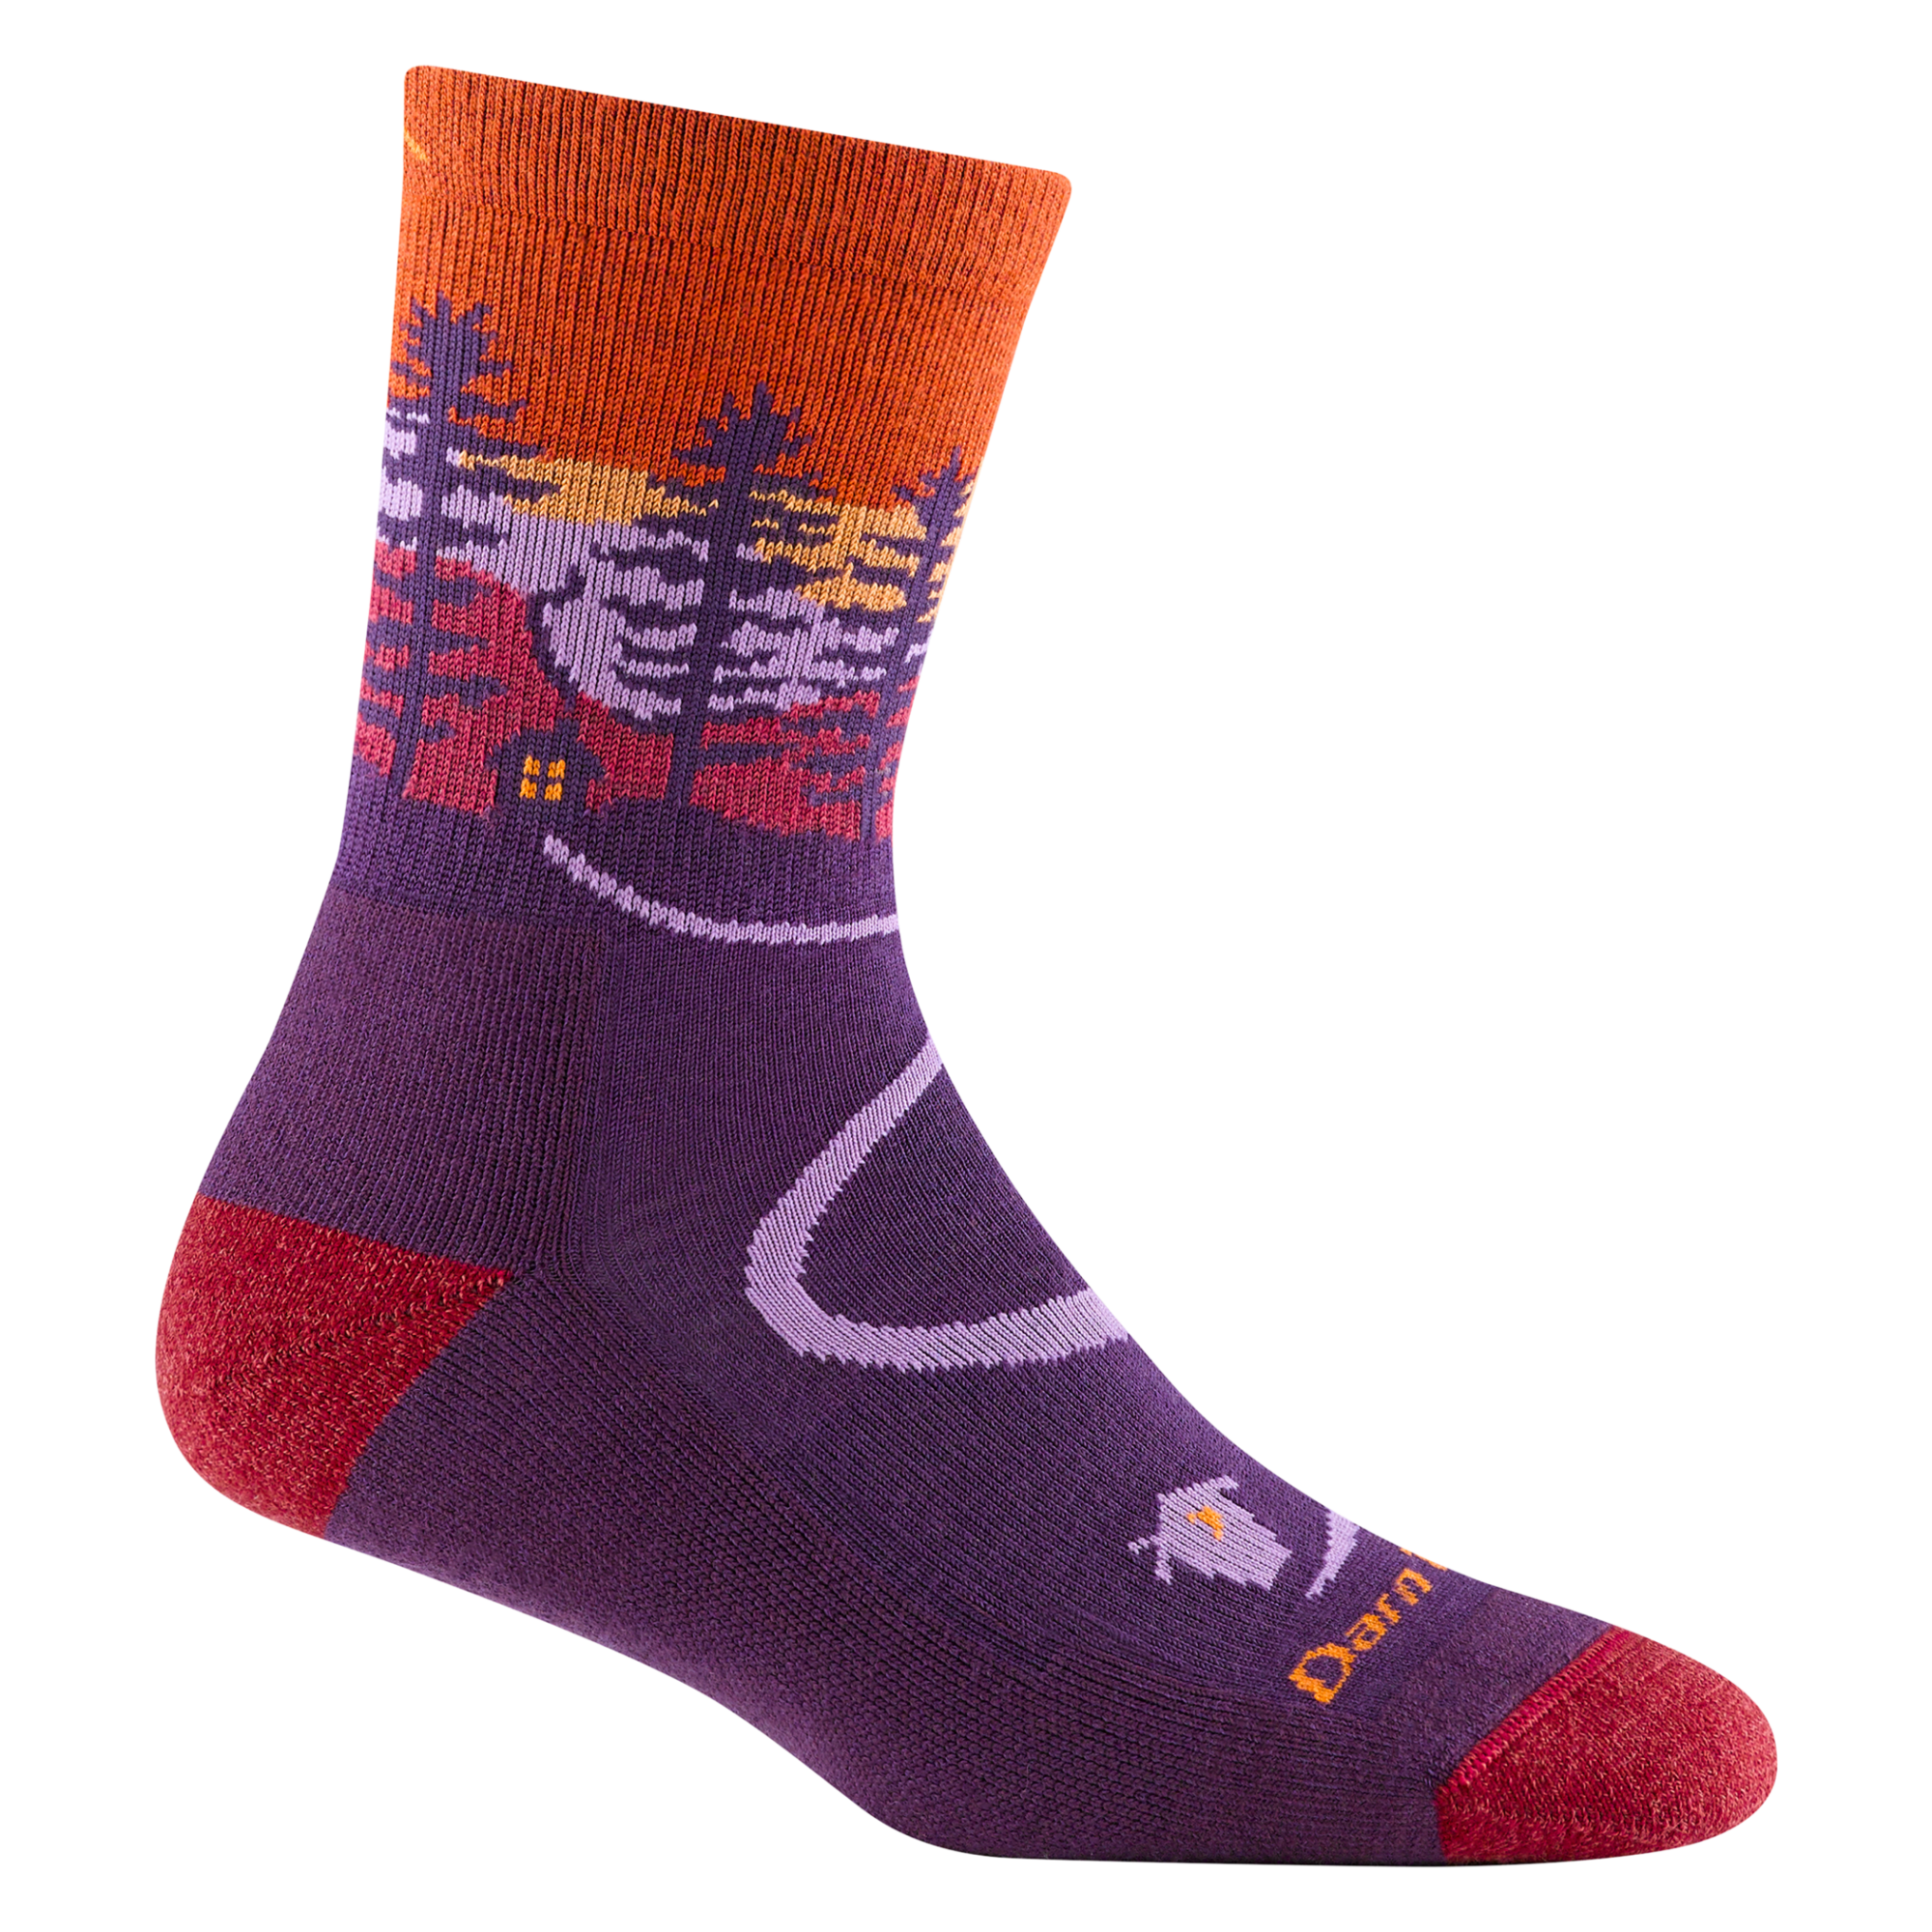 5013 women's northwoods micro crew hiking sock in nightshade with a red toe/heel accents and  cabin and tree design on the ankle